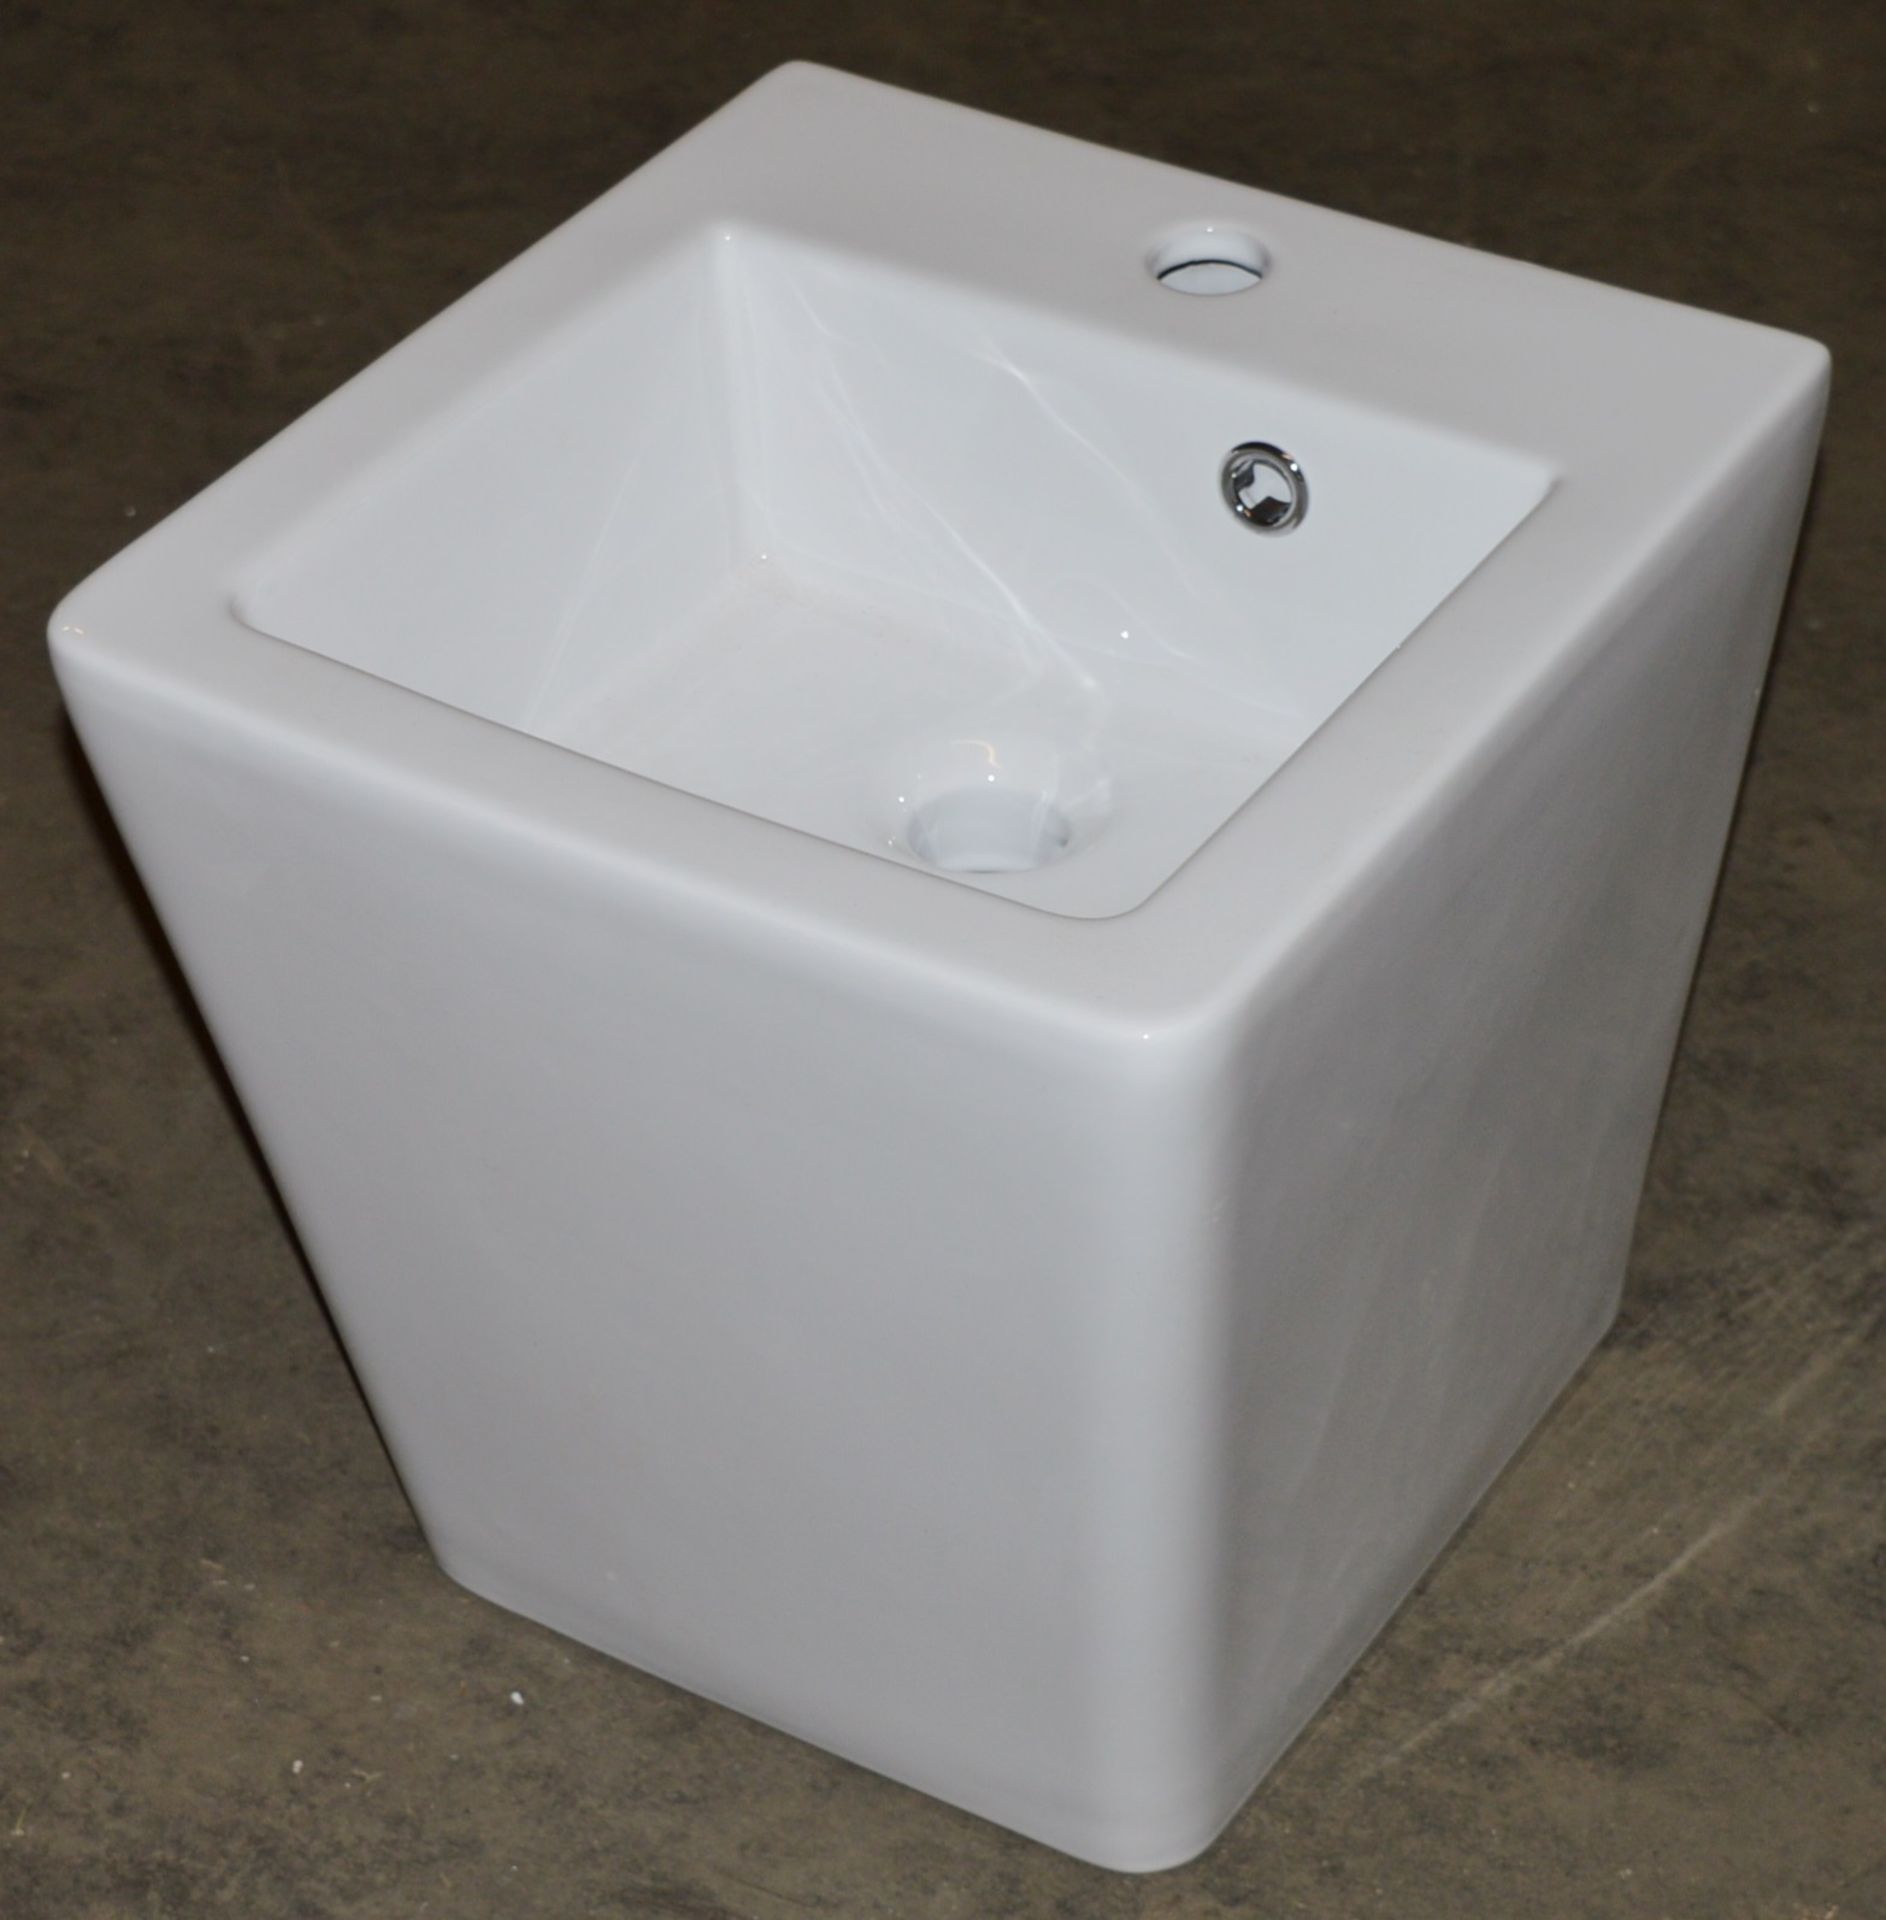 1 x Montreal Wall Hung Basin - Beautiful Angular Shape and Tapered Design - H40 x W37 x D40 cms -